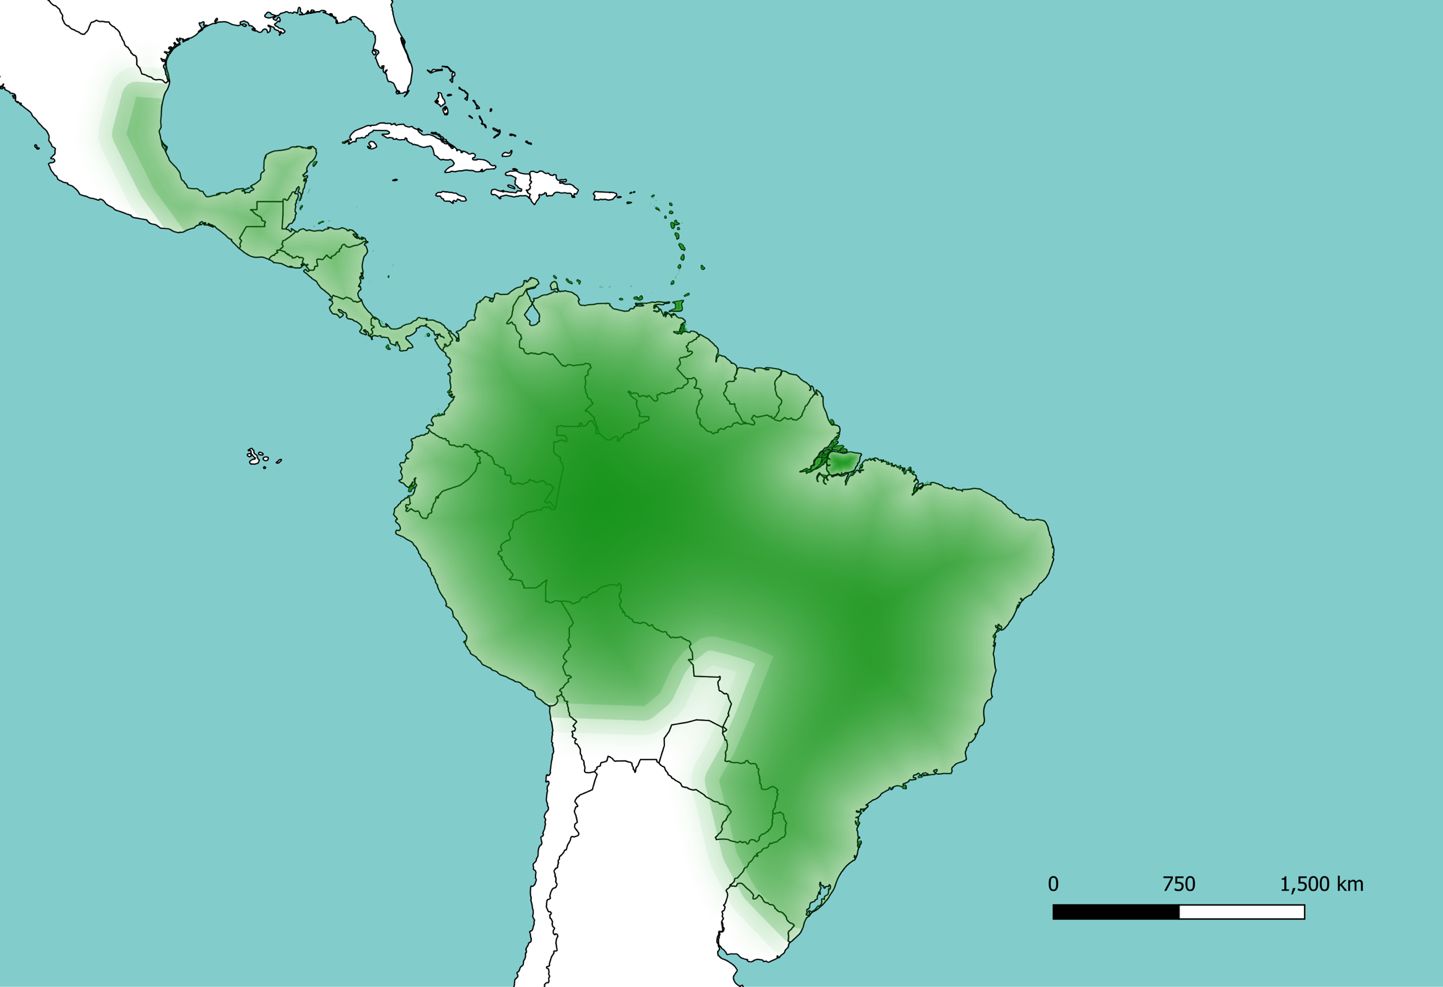 Predicted Sabethes cyaneus Fabricius distribution (in green) based on the literature and range of available habitat.